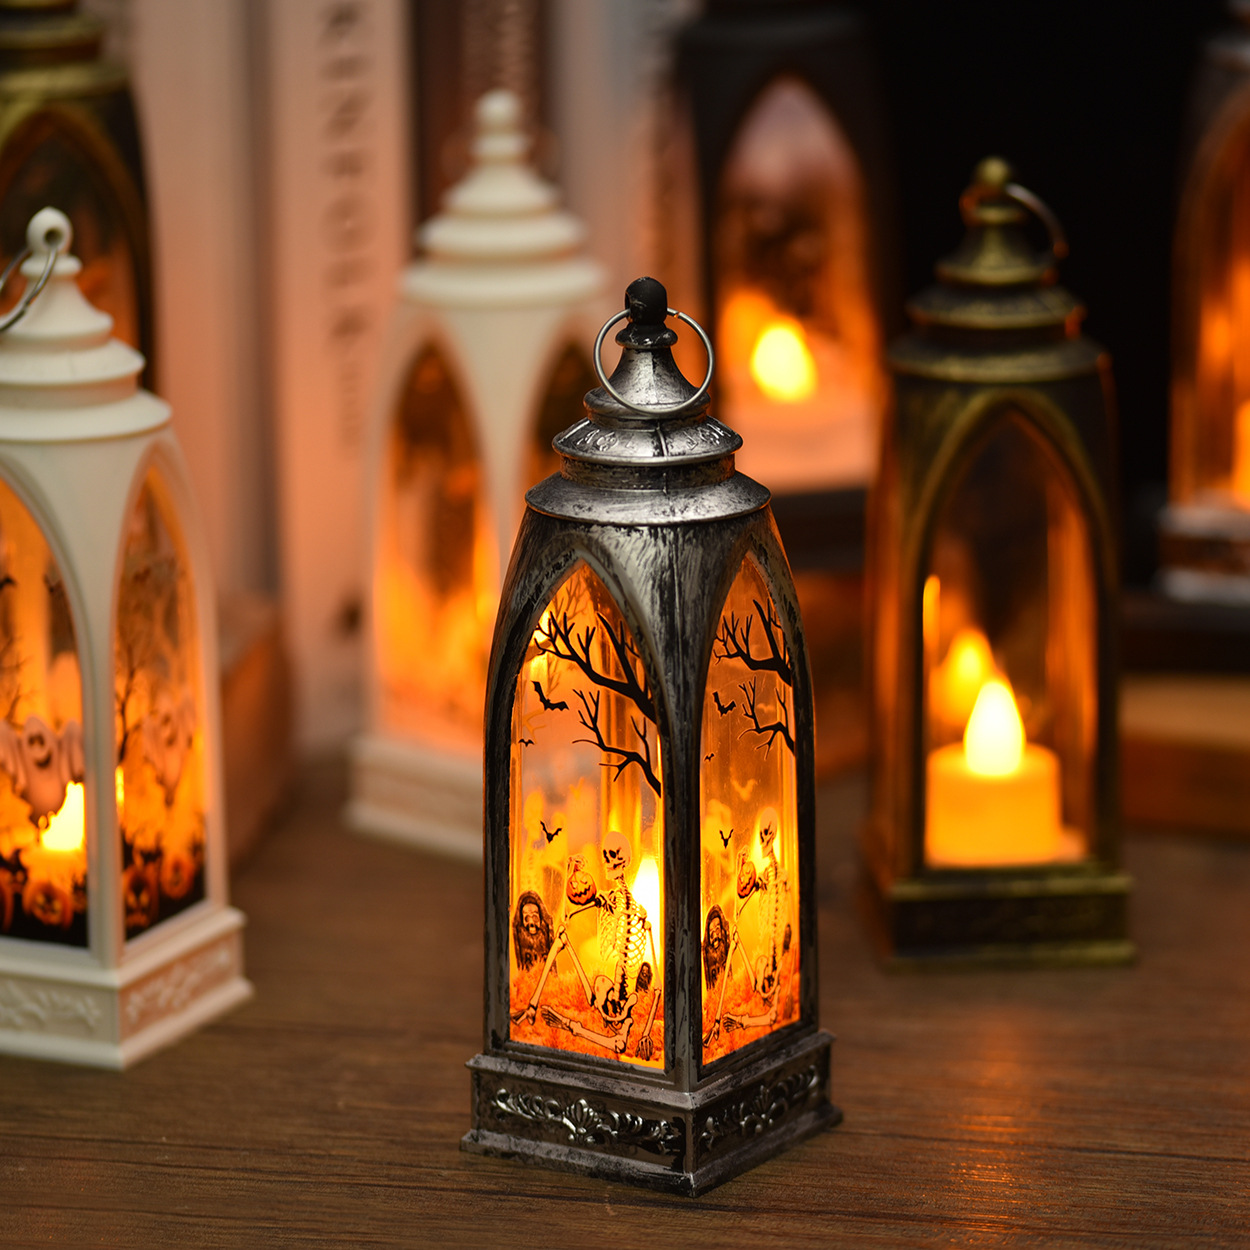 New Electronic Storm Lantern Small Oil Lamp Exclusive for Cross-Border European Style Vintage Ornament Small Night Lamp Ambience Light Candle Light Wholesale